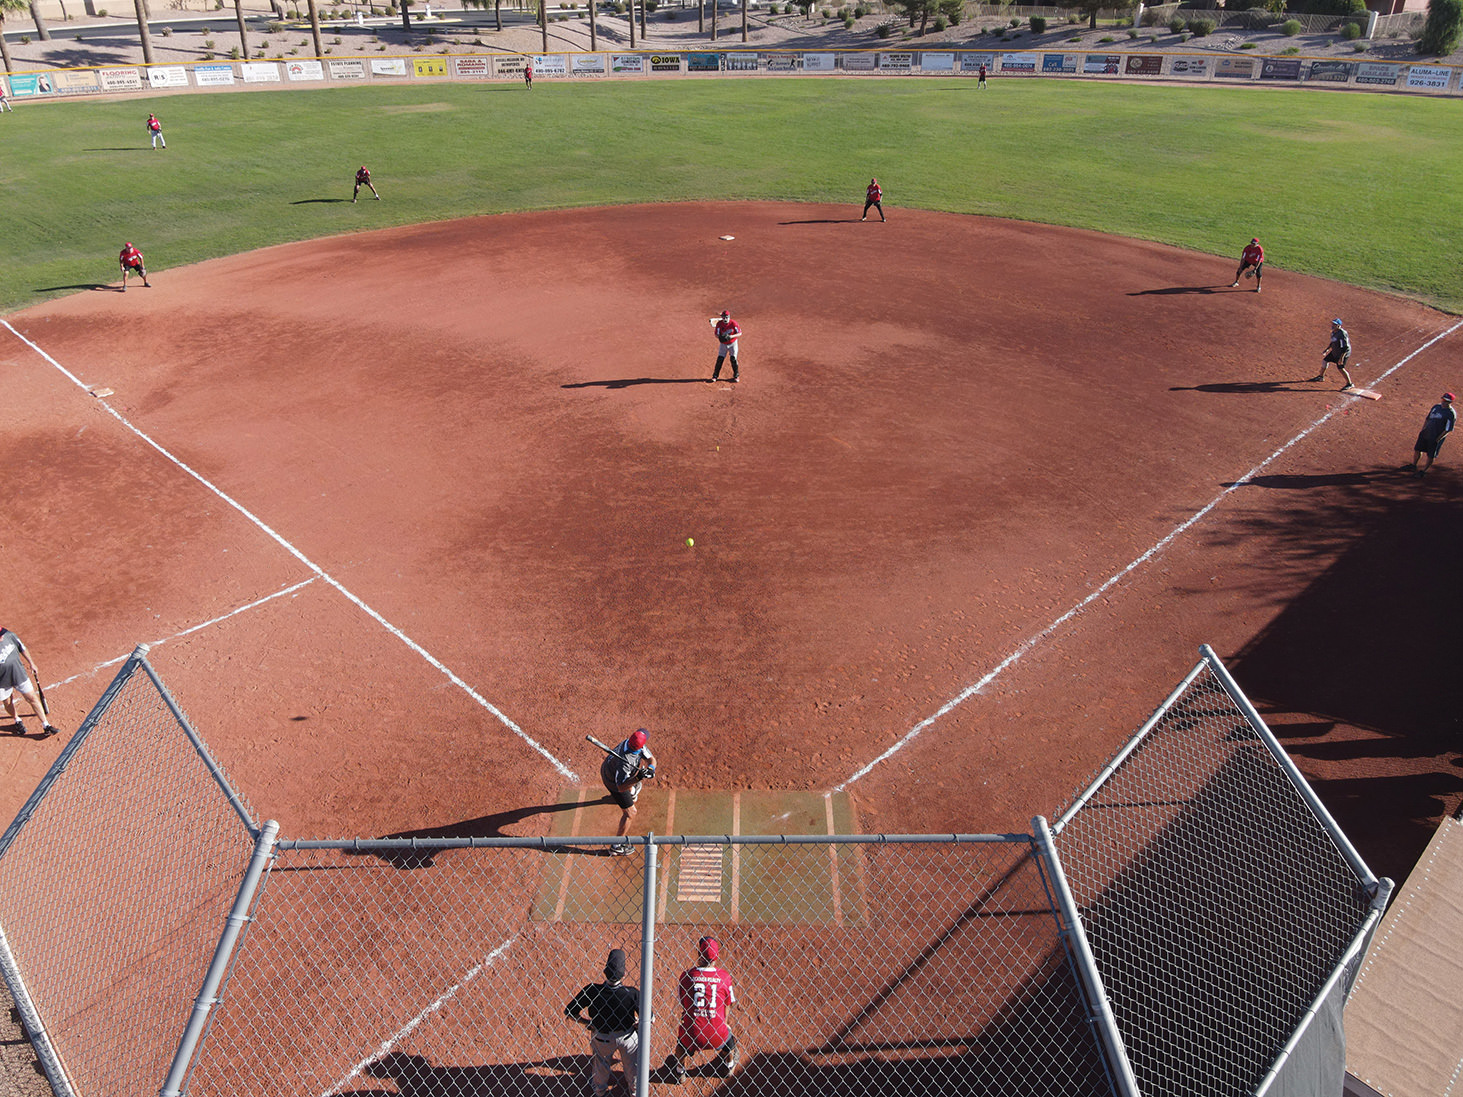 A "drone shot" from a recent Sun Division game: Brenden Financial vs. Leckner Realty (Courtesy of SkyView Digital Media, Alysa Chapman, Principal)